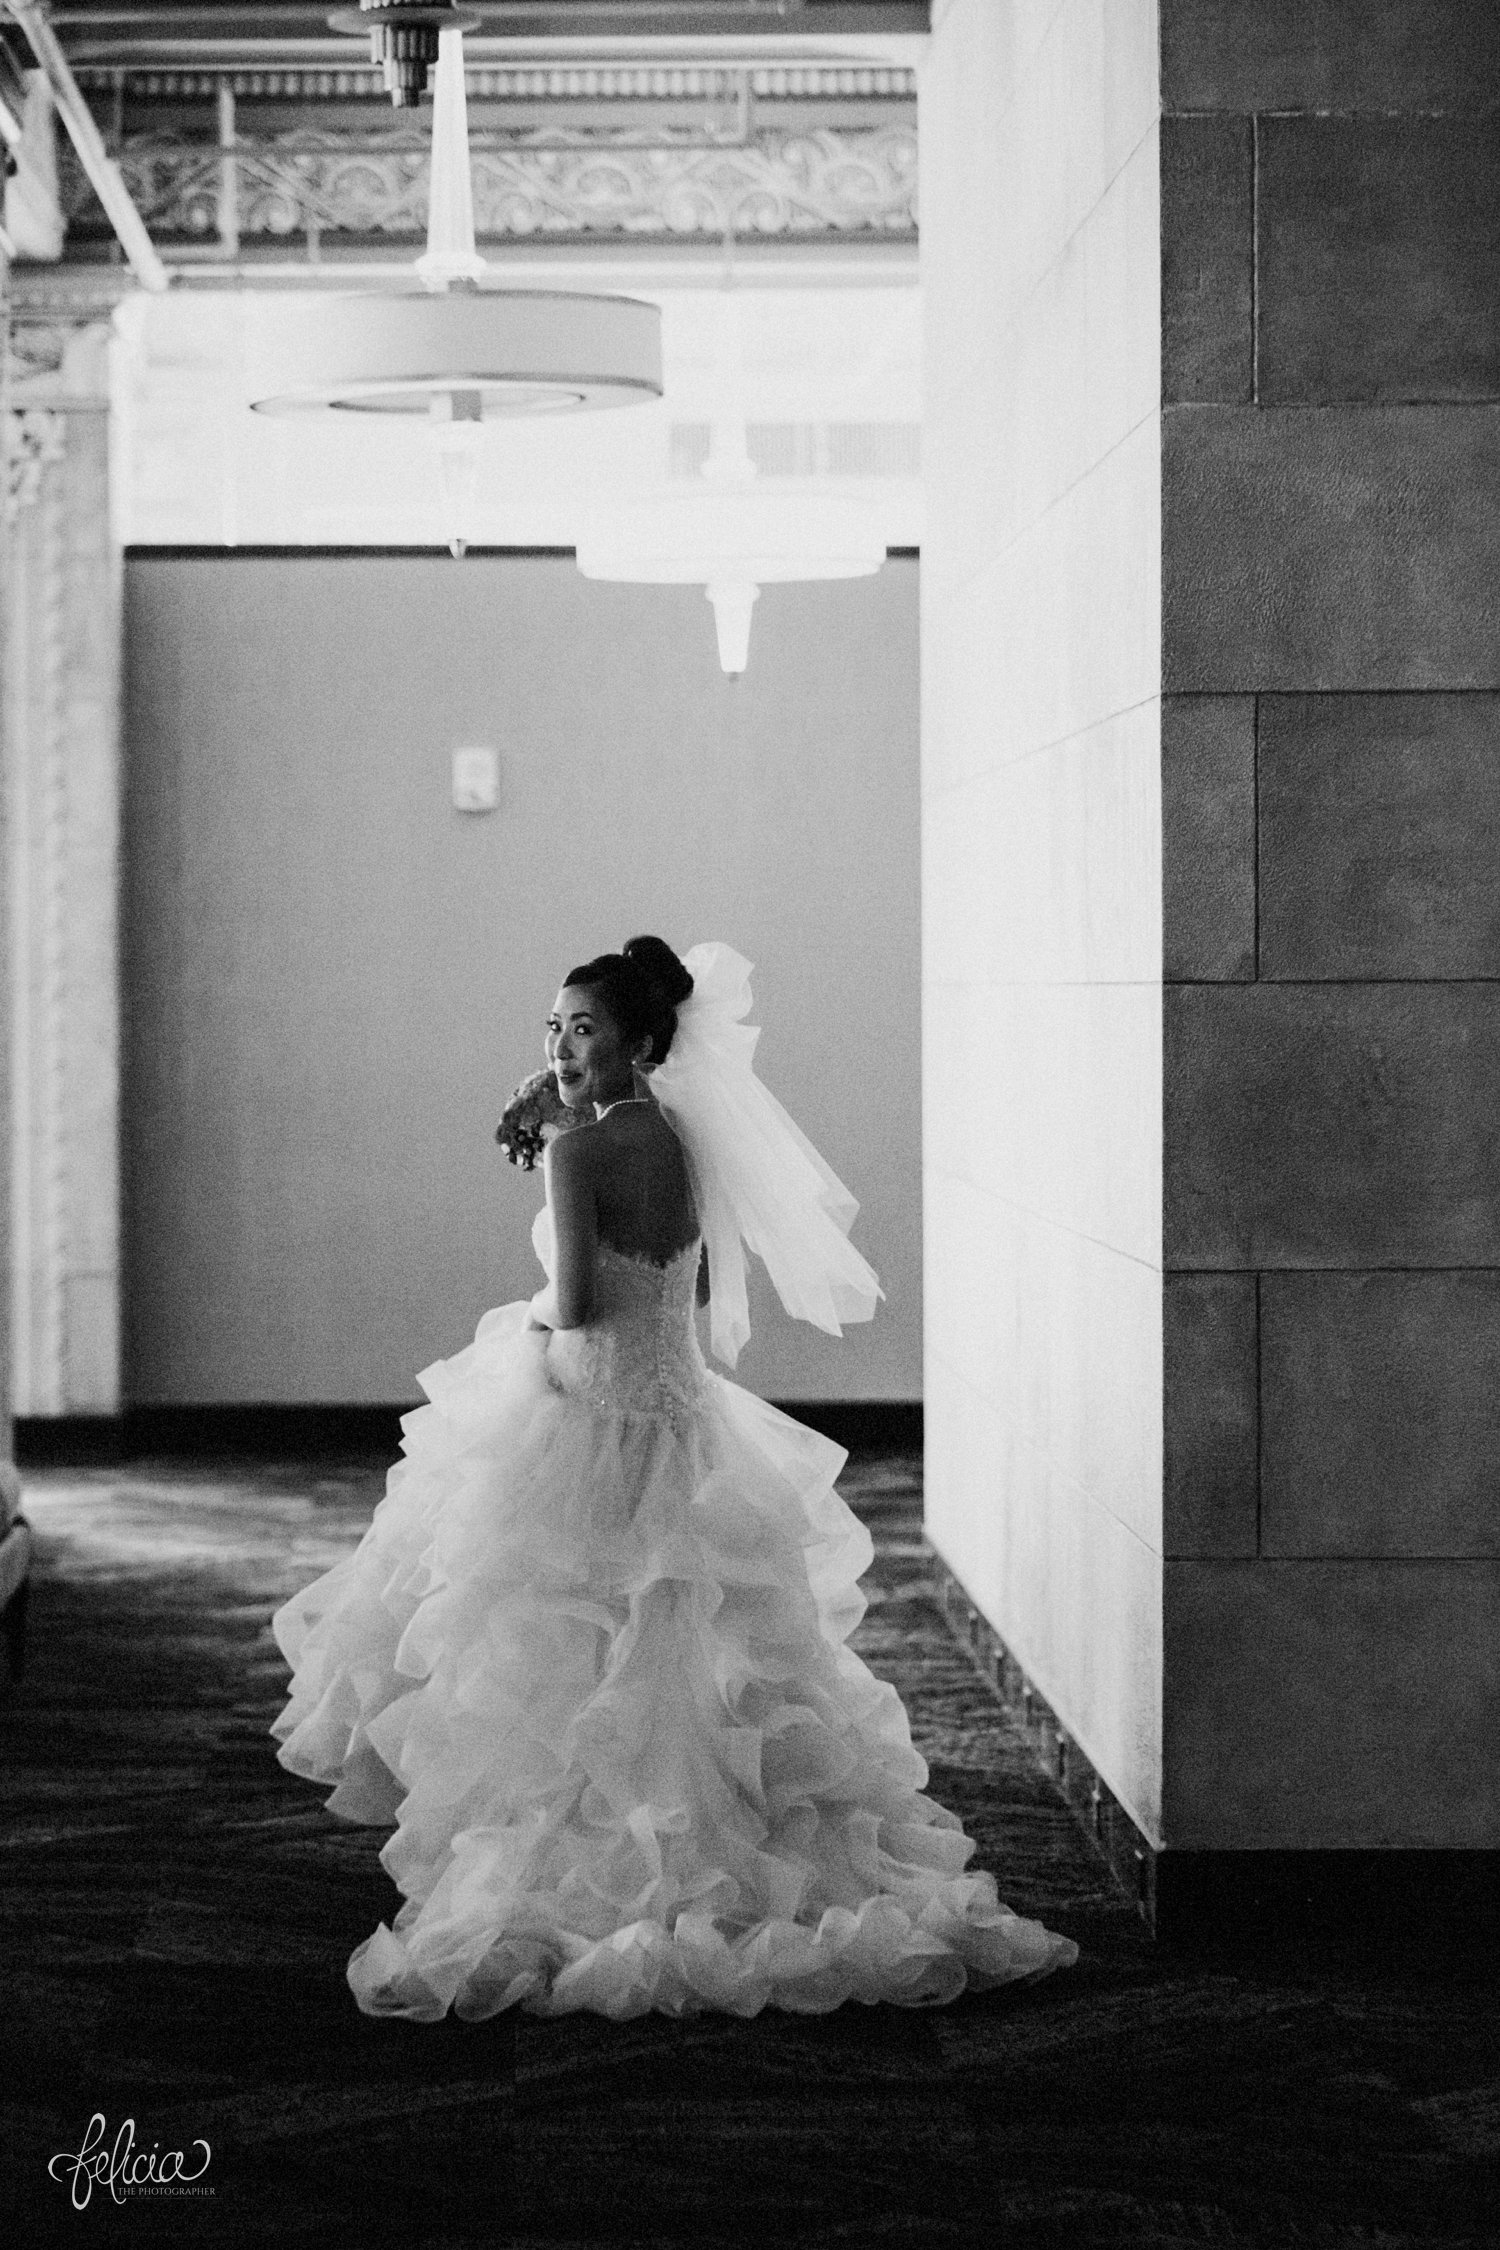 images by feliciathephotographer.com | destination wedding photographer | the grand hall at power and light | kansas city | missouri | downtown | glamorous | multicultural | black and white | details | getting ready | posh bridal | pearls | full skirt | pre ceremony | 